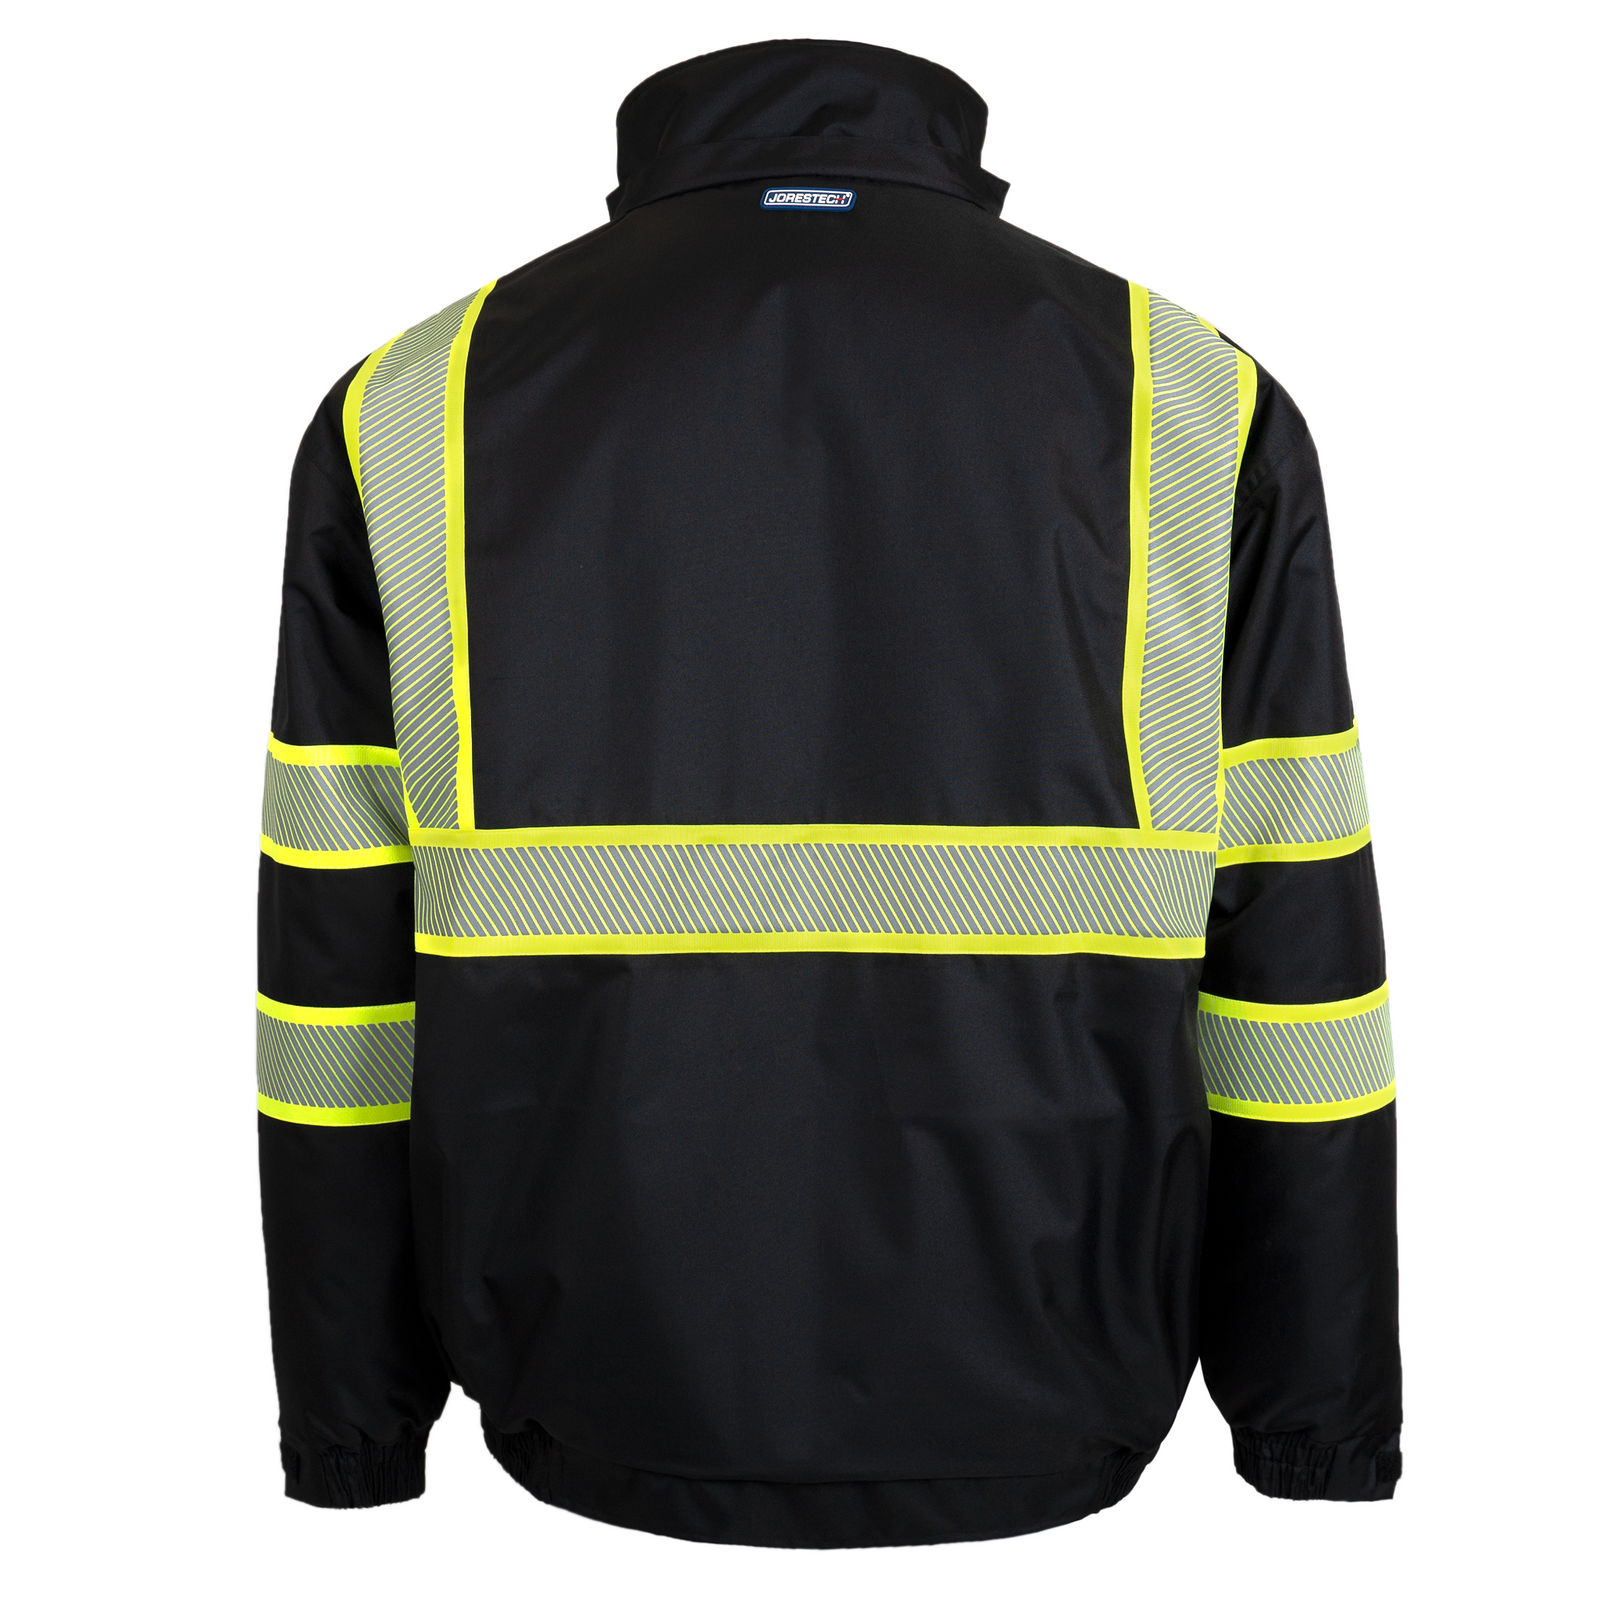 Black Hi-vis safety winter jacket with heat transfer reflective tapes, contrasting hi vis background and detachable hoodie